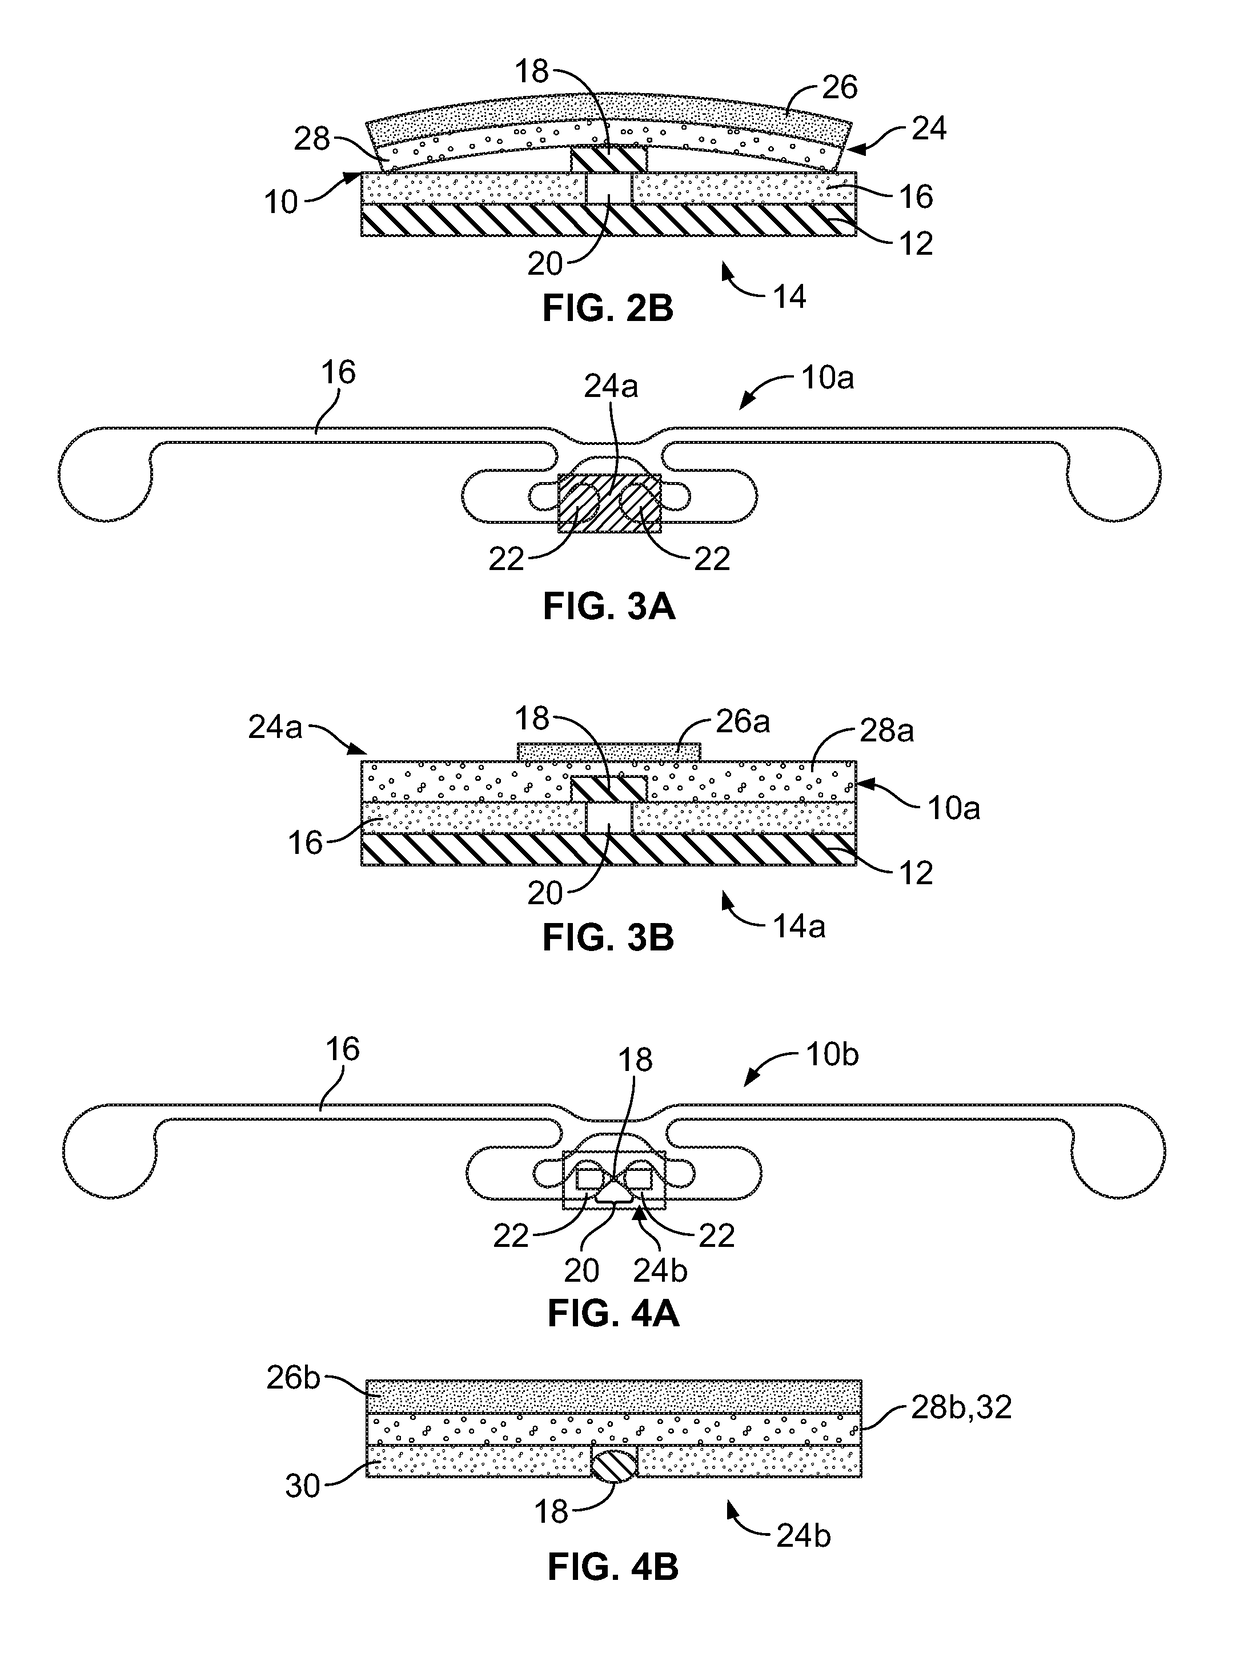 RFID tags with shielding structure for incorporation into microwavable food packaging